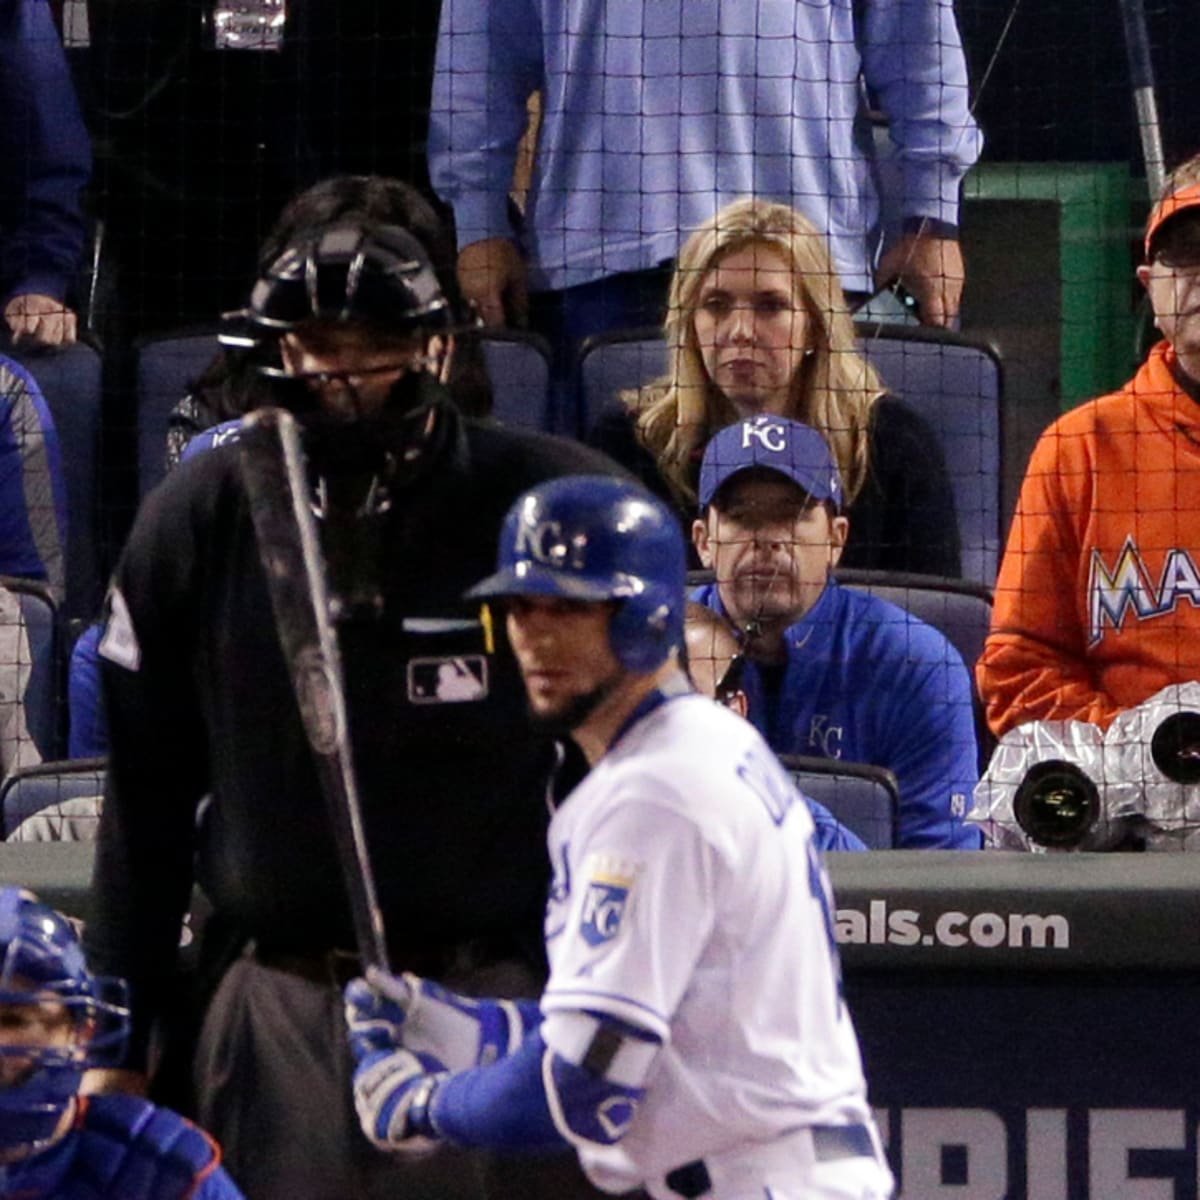 who is the guy with the marlins jersey